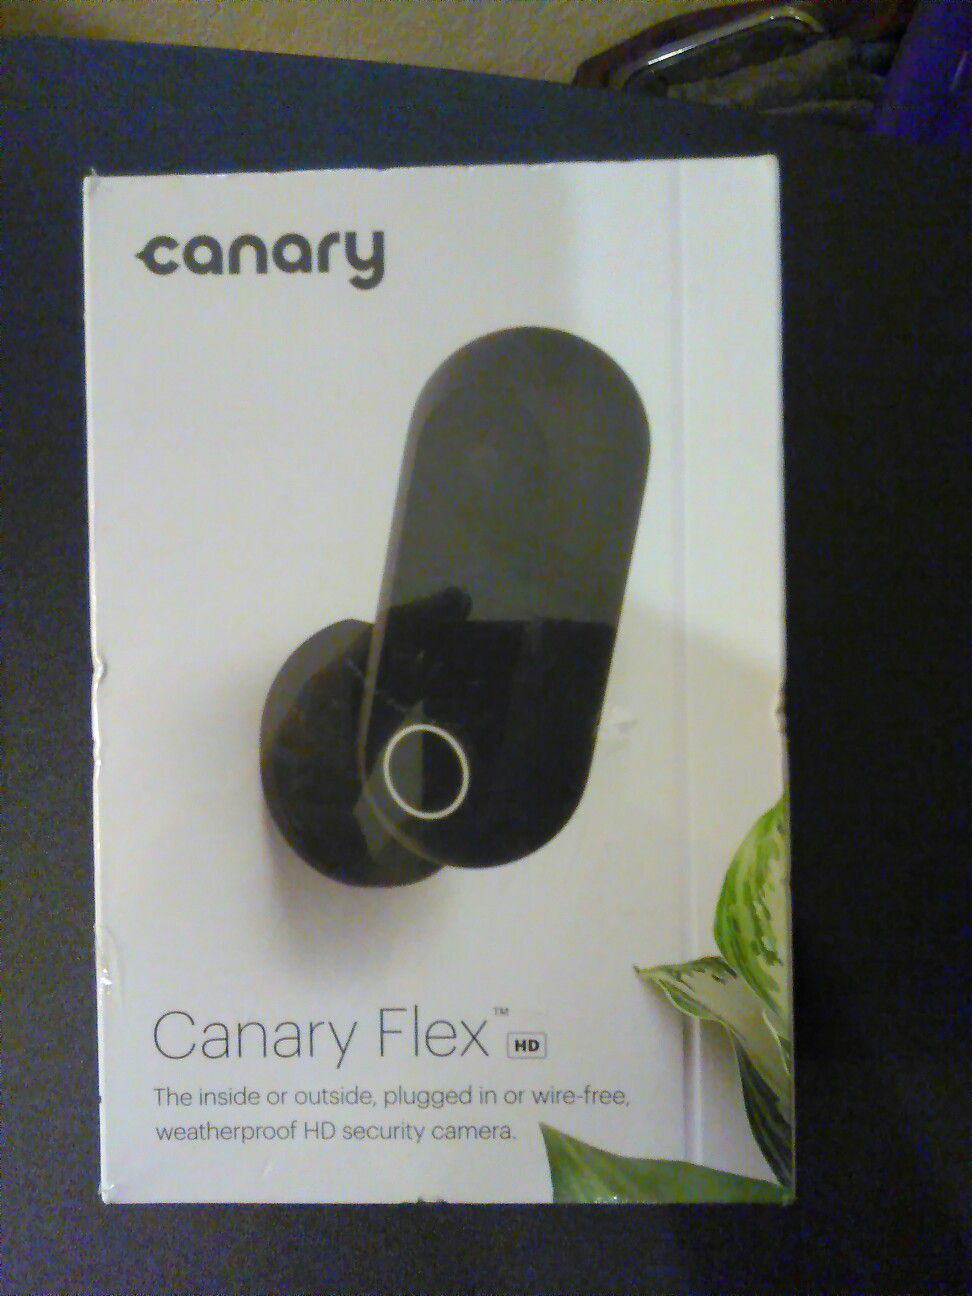 Canary flex HD indoor or outdoor security camera Plug-In or Wireless